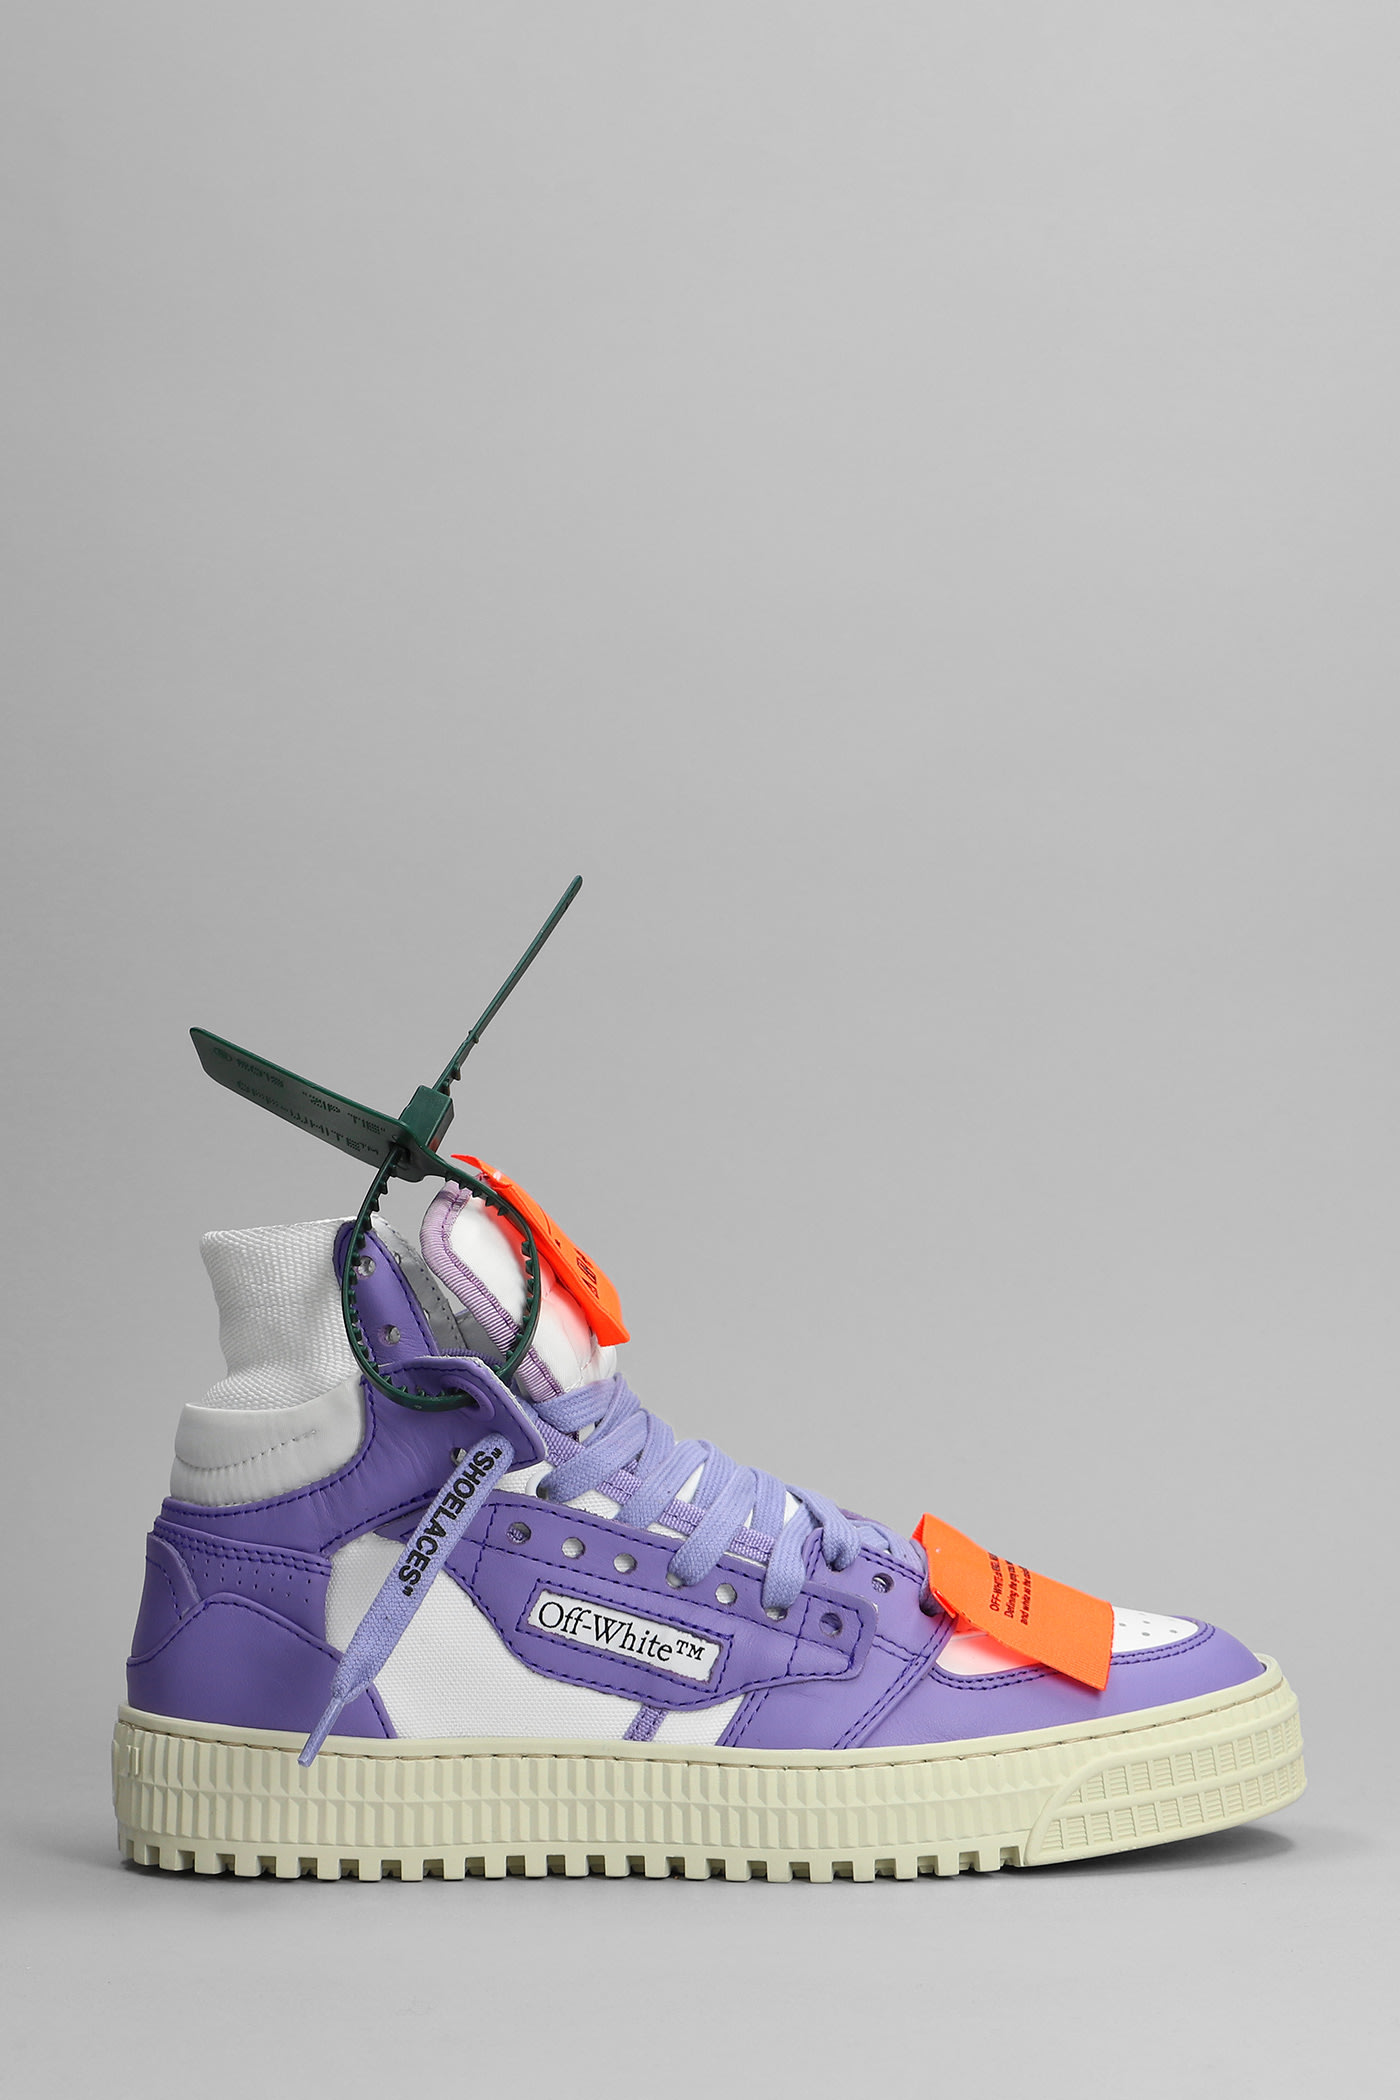 OFF-WHITE 3.0 OFF COURT SNEAKERS IN WHITE LEATHER